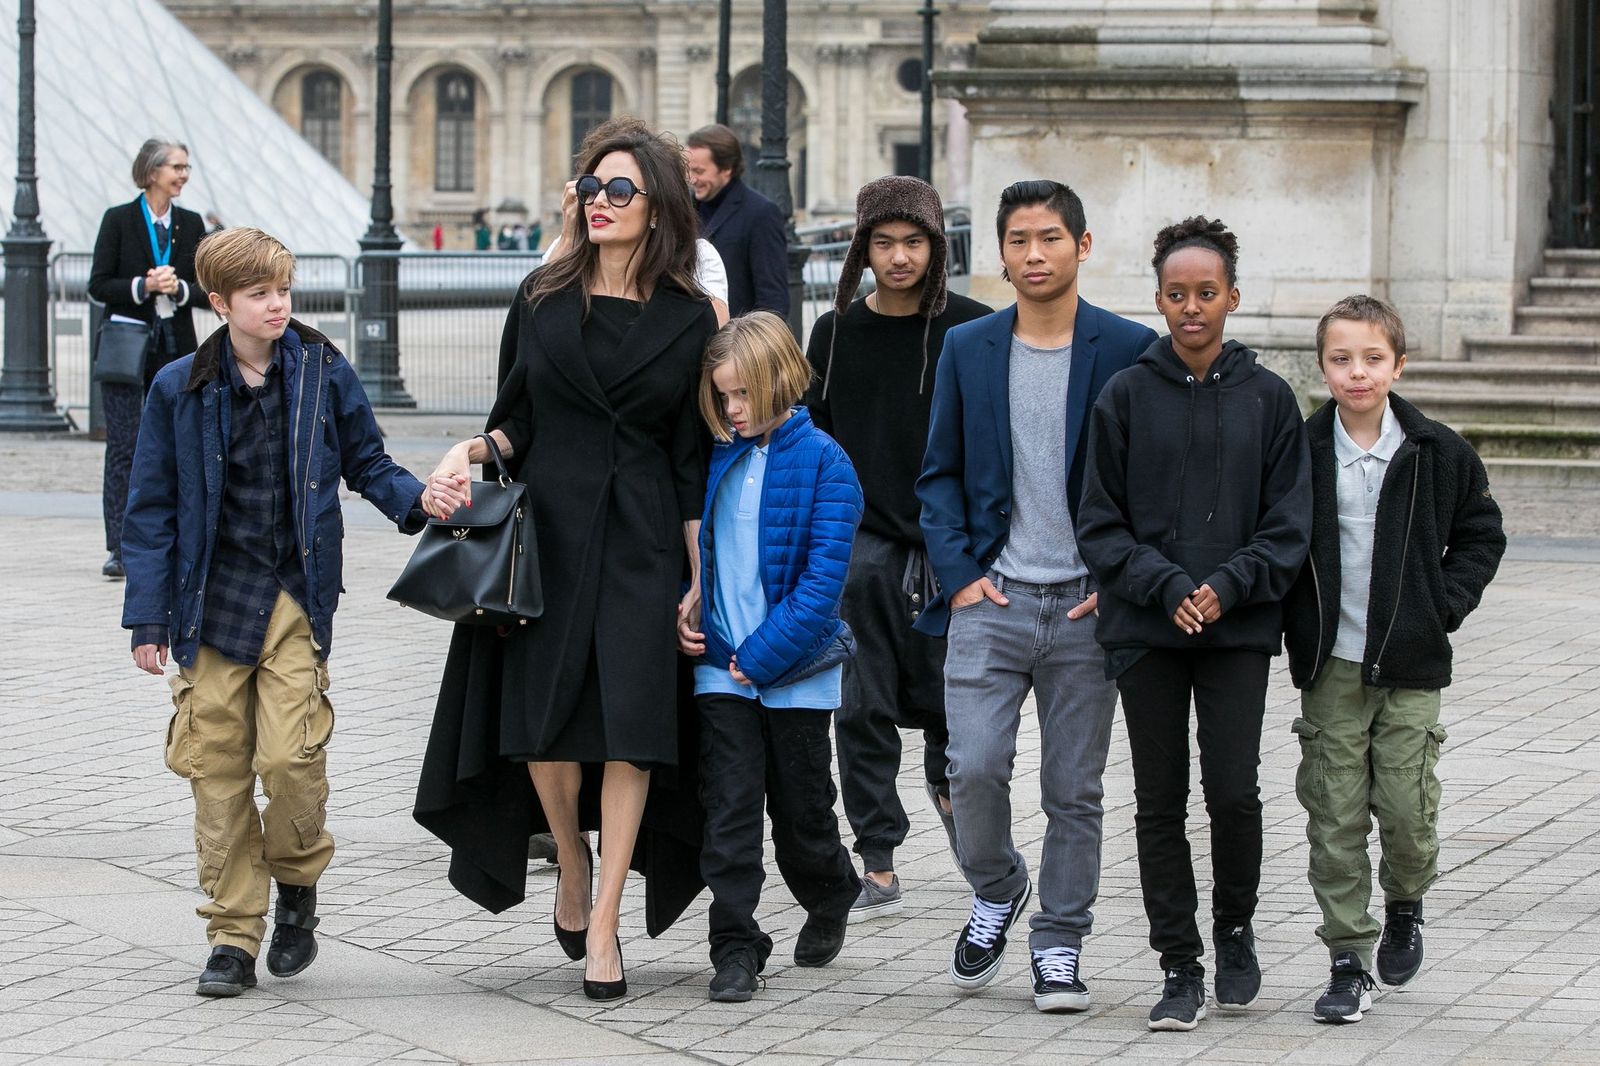 Angelina Jolie and her children Maddox, Shiloh, Vivienne, Knox, Zahara, and Pax Jolie-Pitt leaving the Louvre museum on January 30, 2018, in Paris, France | Photo: Getty Images